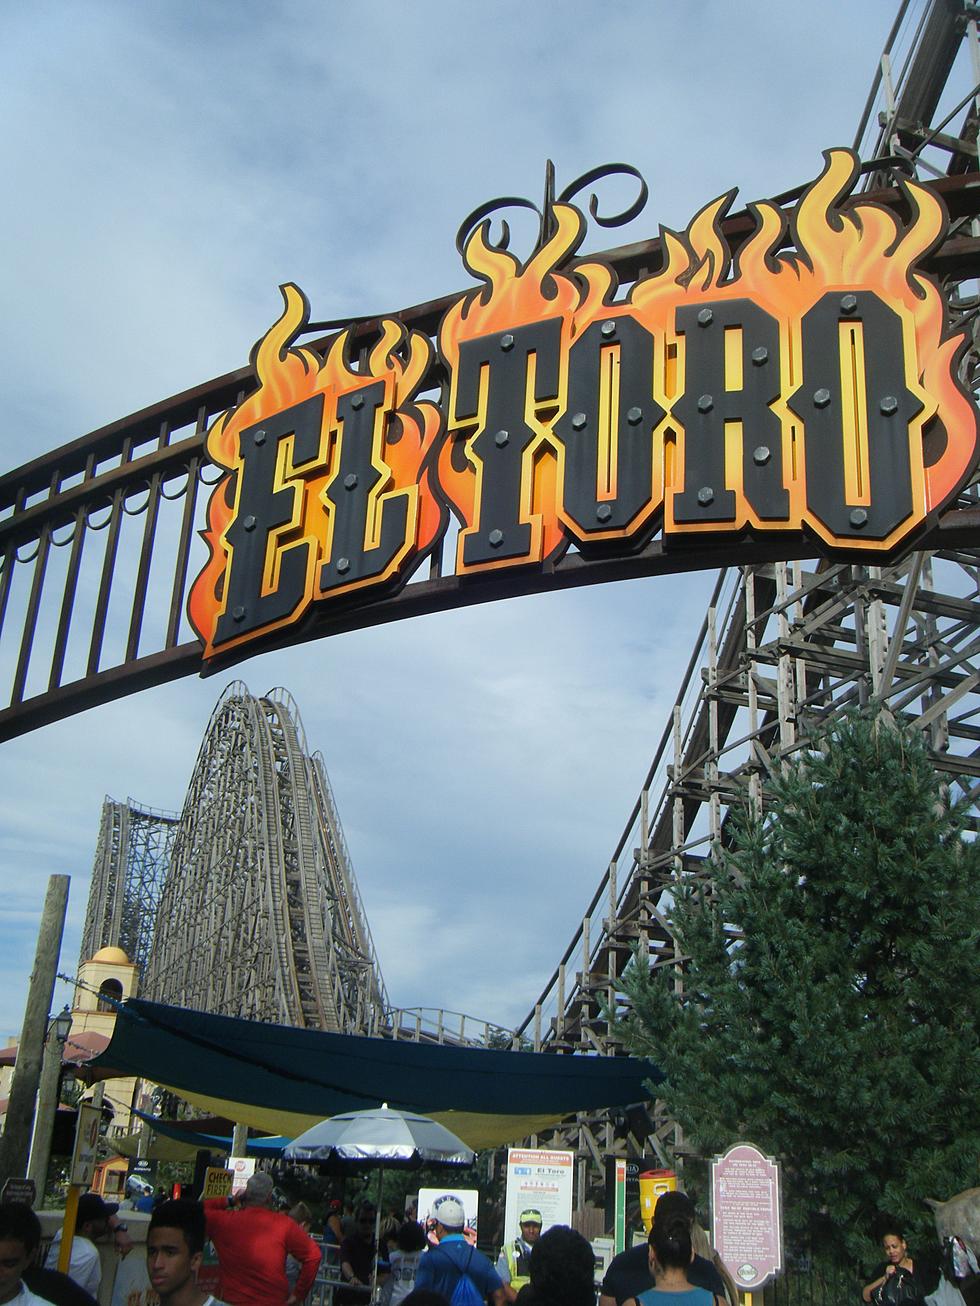 Popular Ride at Six Flags Great Adventure, in New Jersey, Derailed Causing Fine